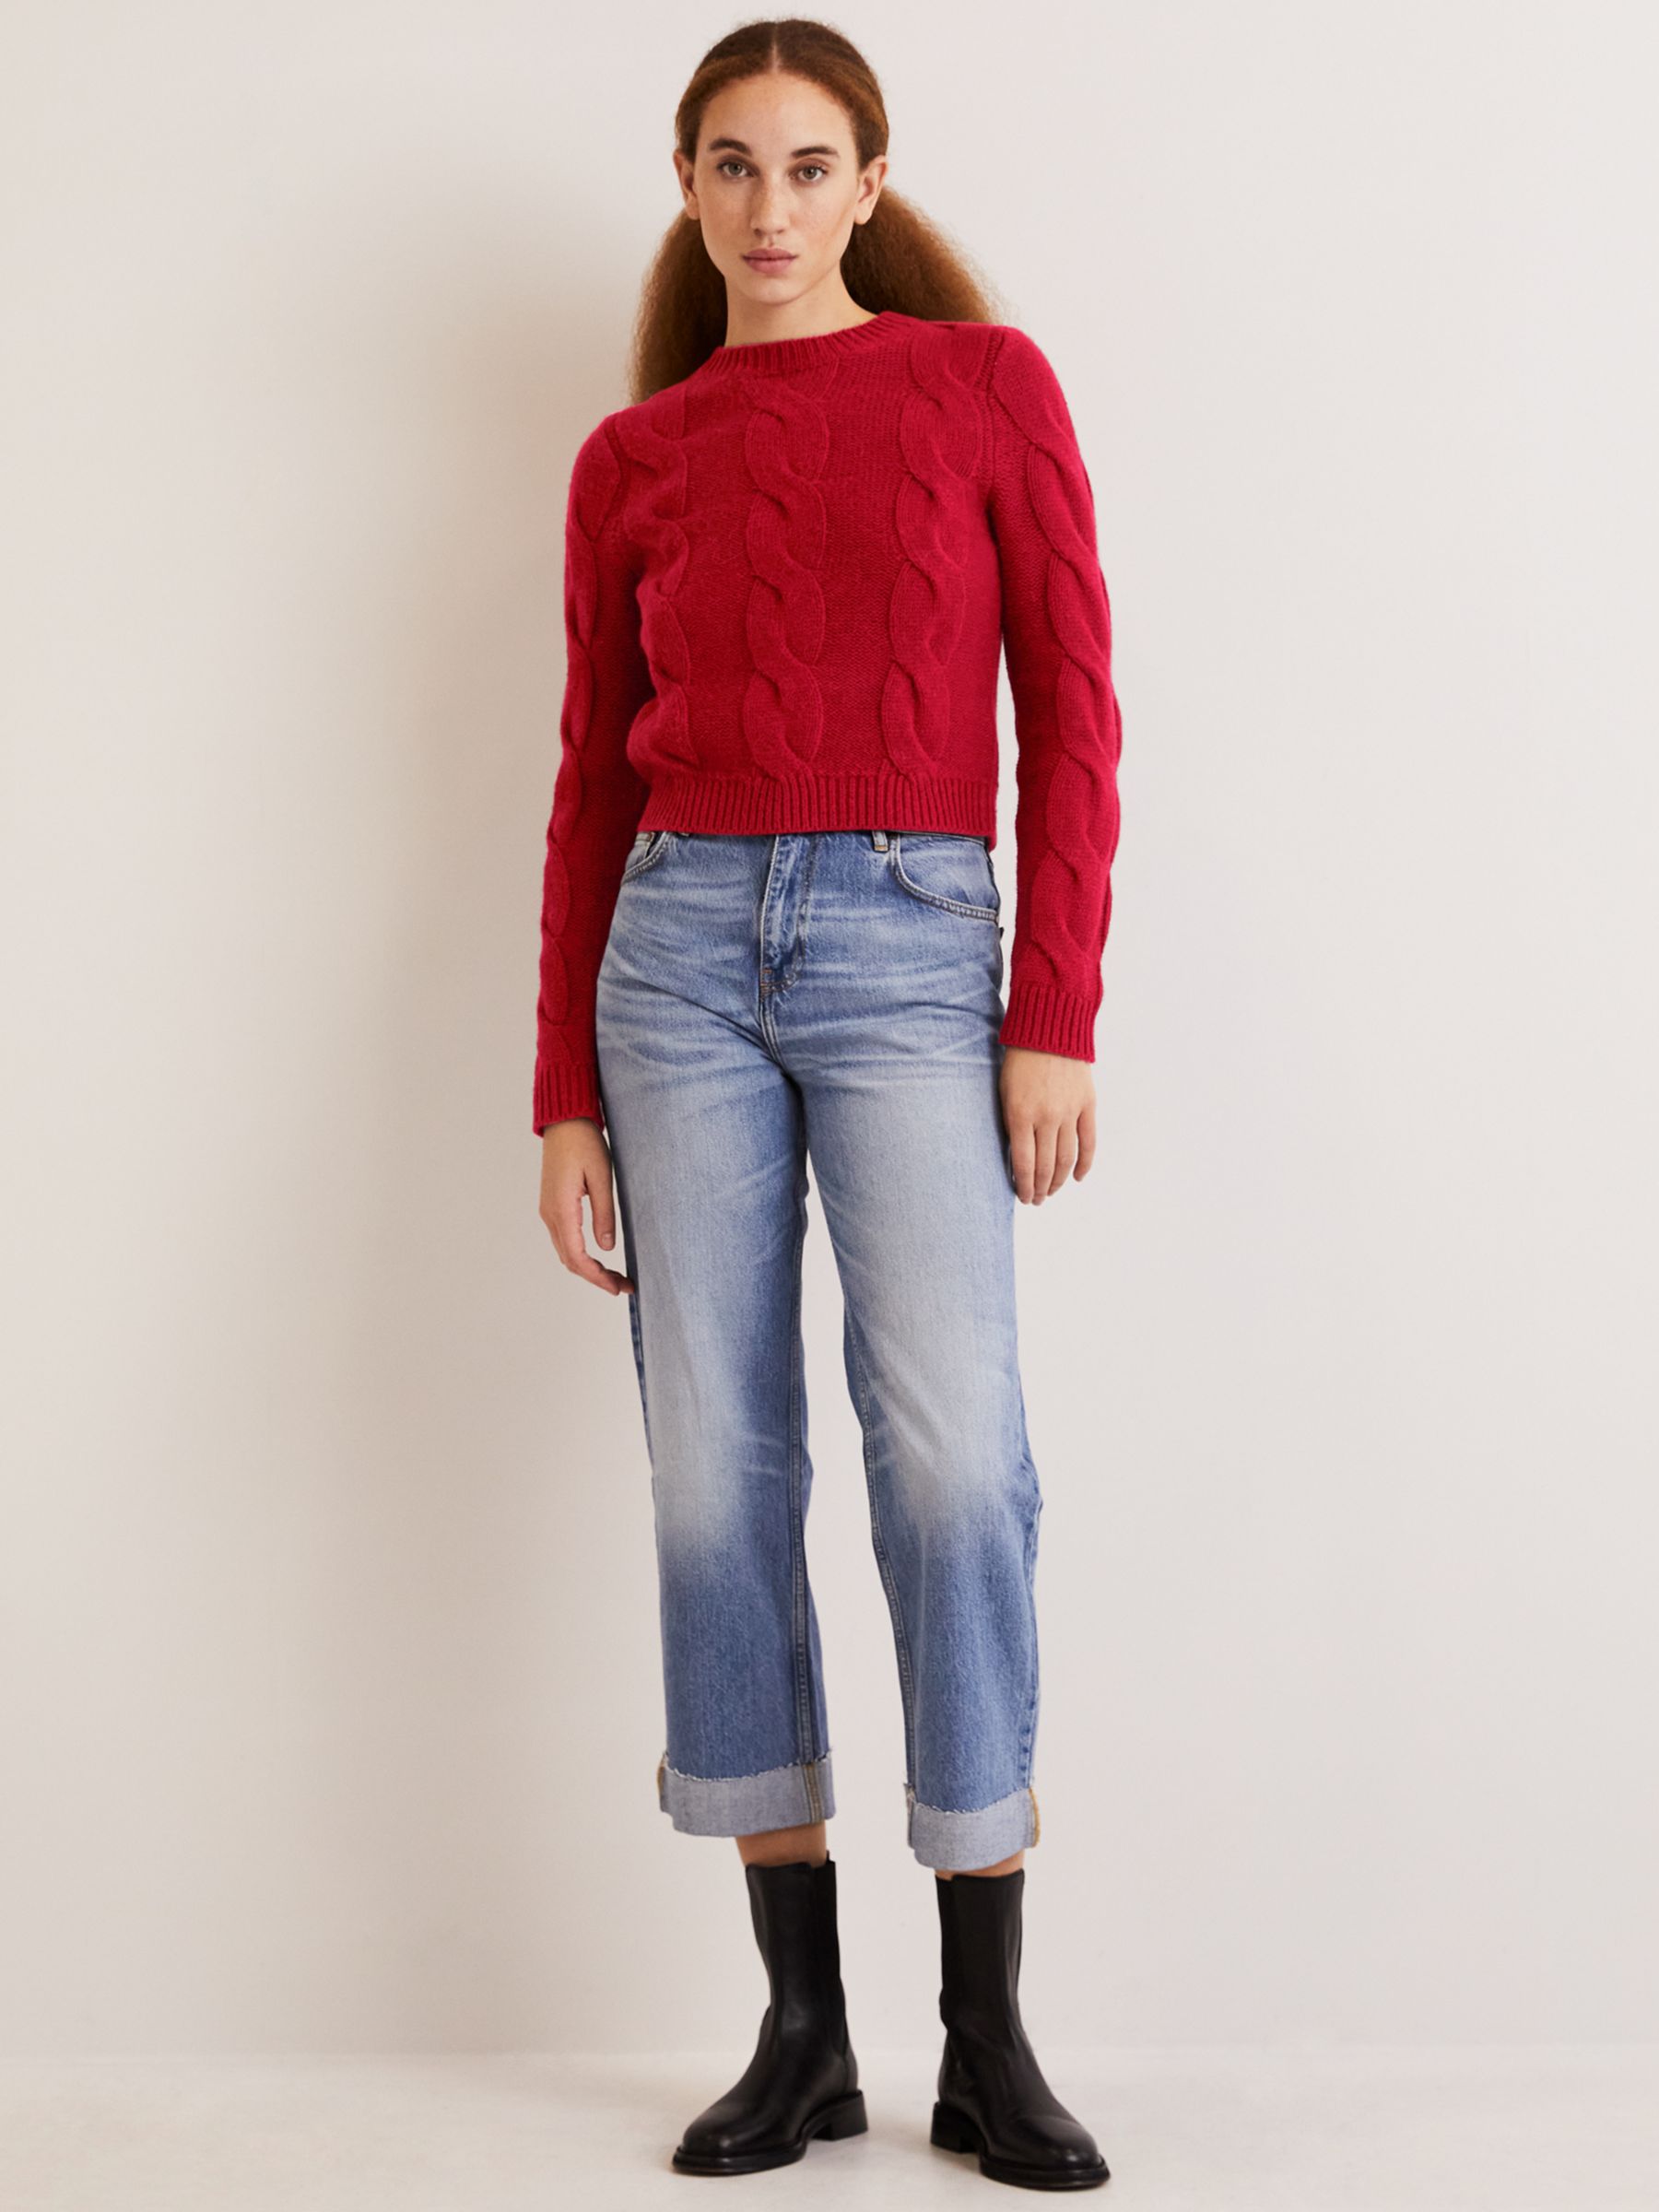 Boden Chunky Cable Knit Wool Blend Jumper, Russet Red at John Lewis ...